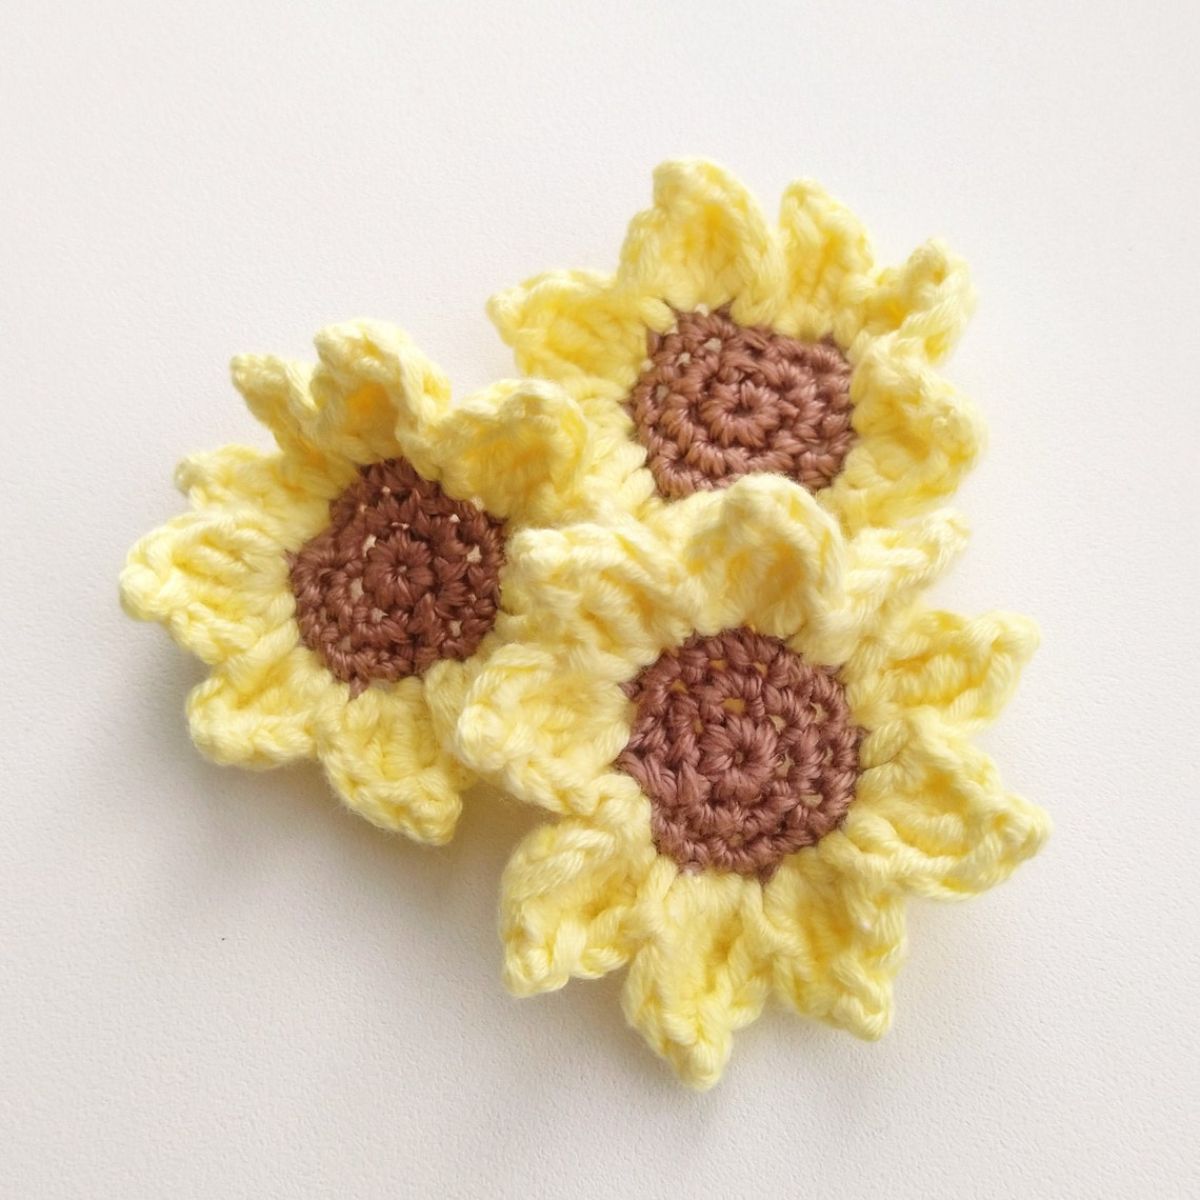 Three small crochet yellow and brown sunflowers arranged in a triangle on a white background.